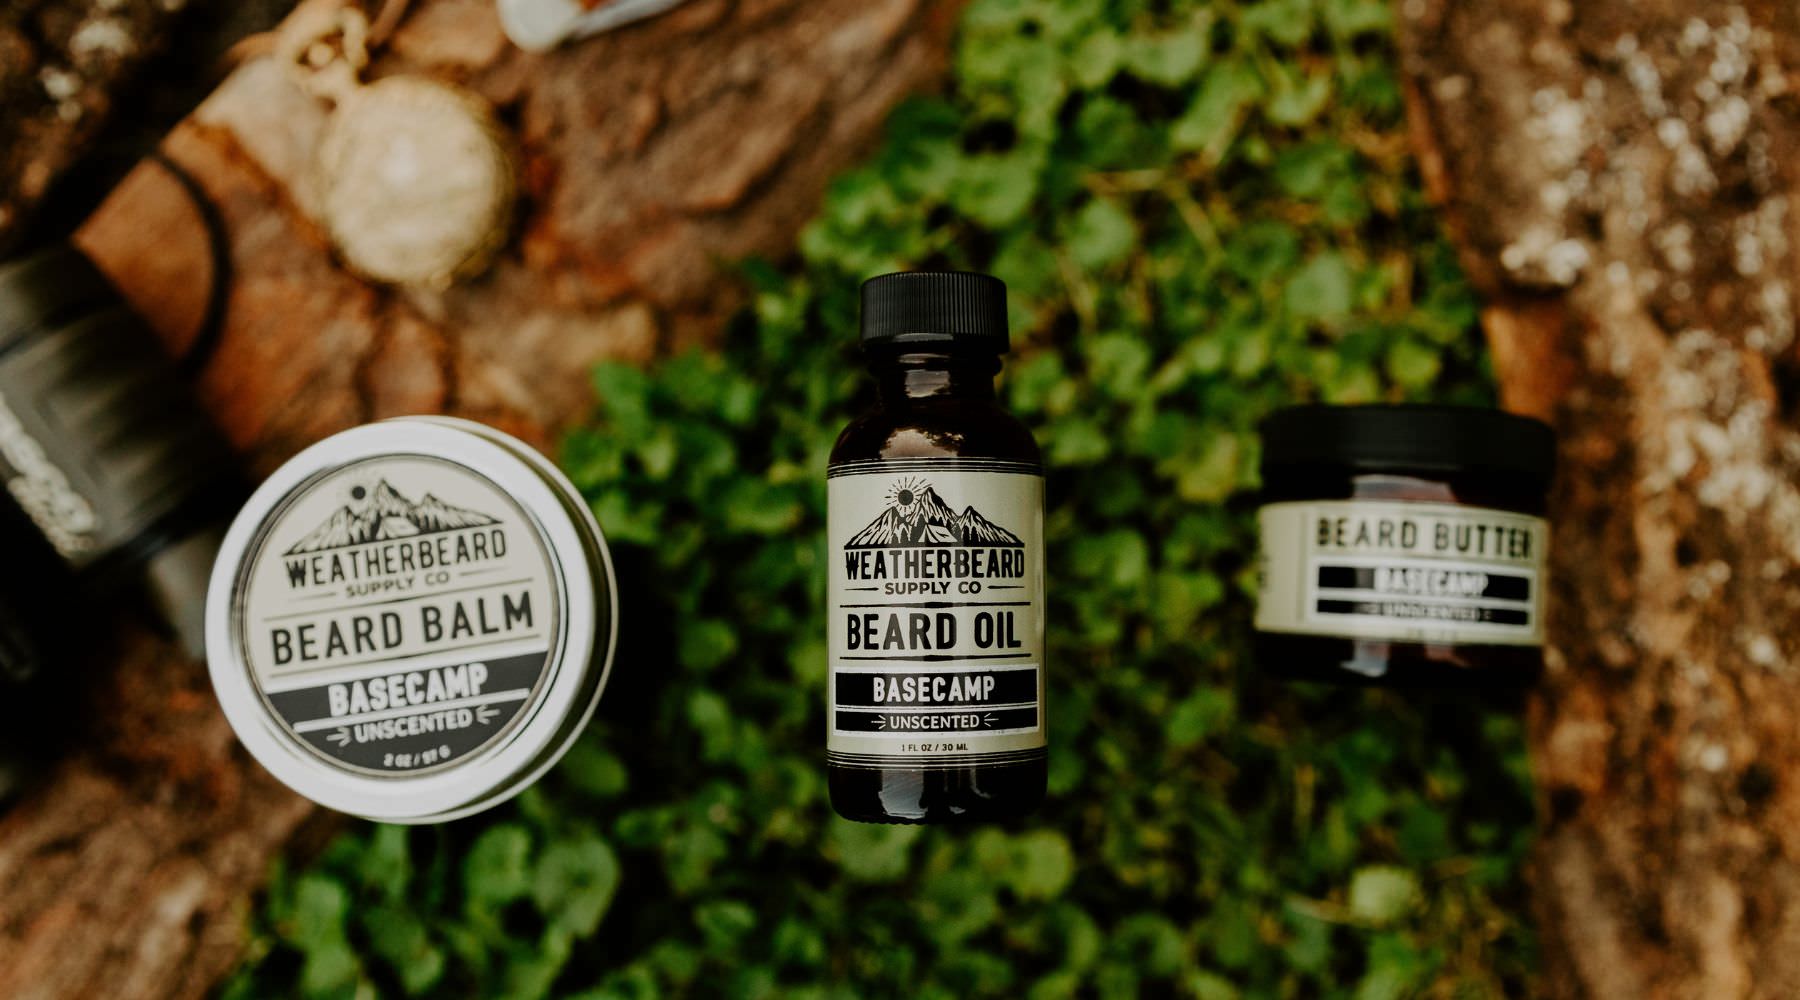 The Ultimate Guide to Beard Oil, Beard Balm, and Beard Butter - Choosing The Right Product For Your Beard